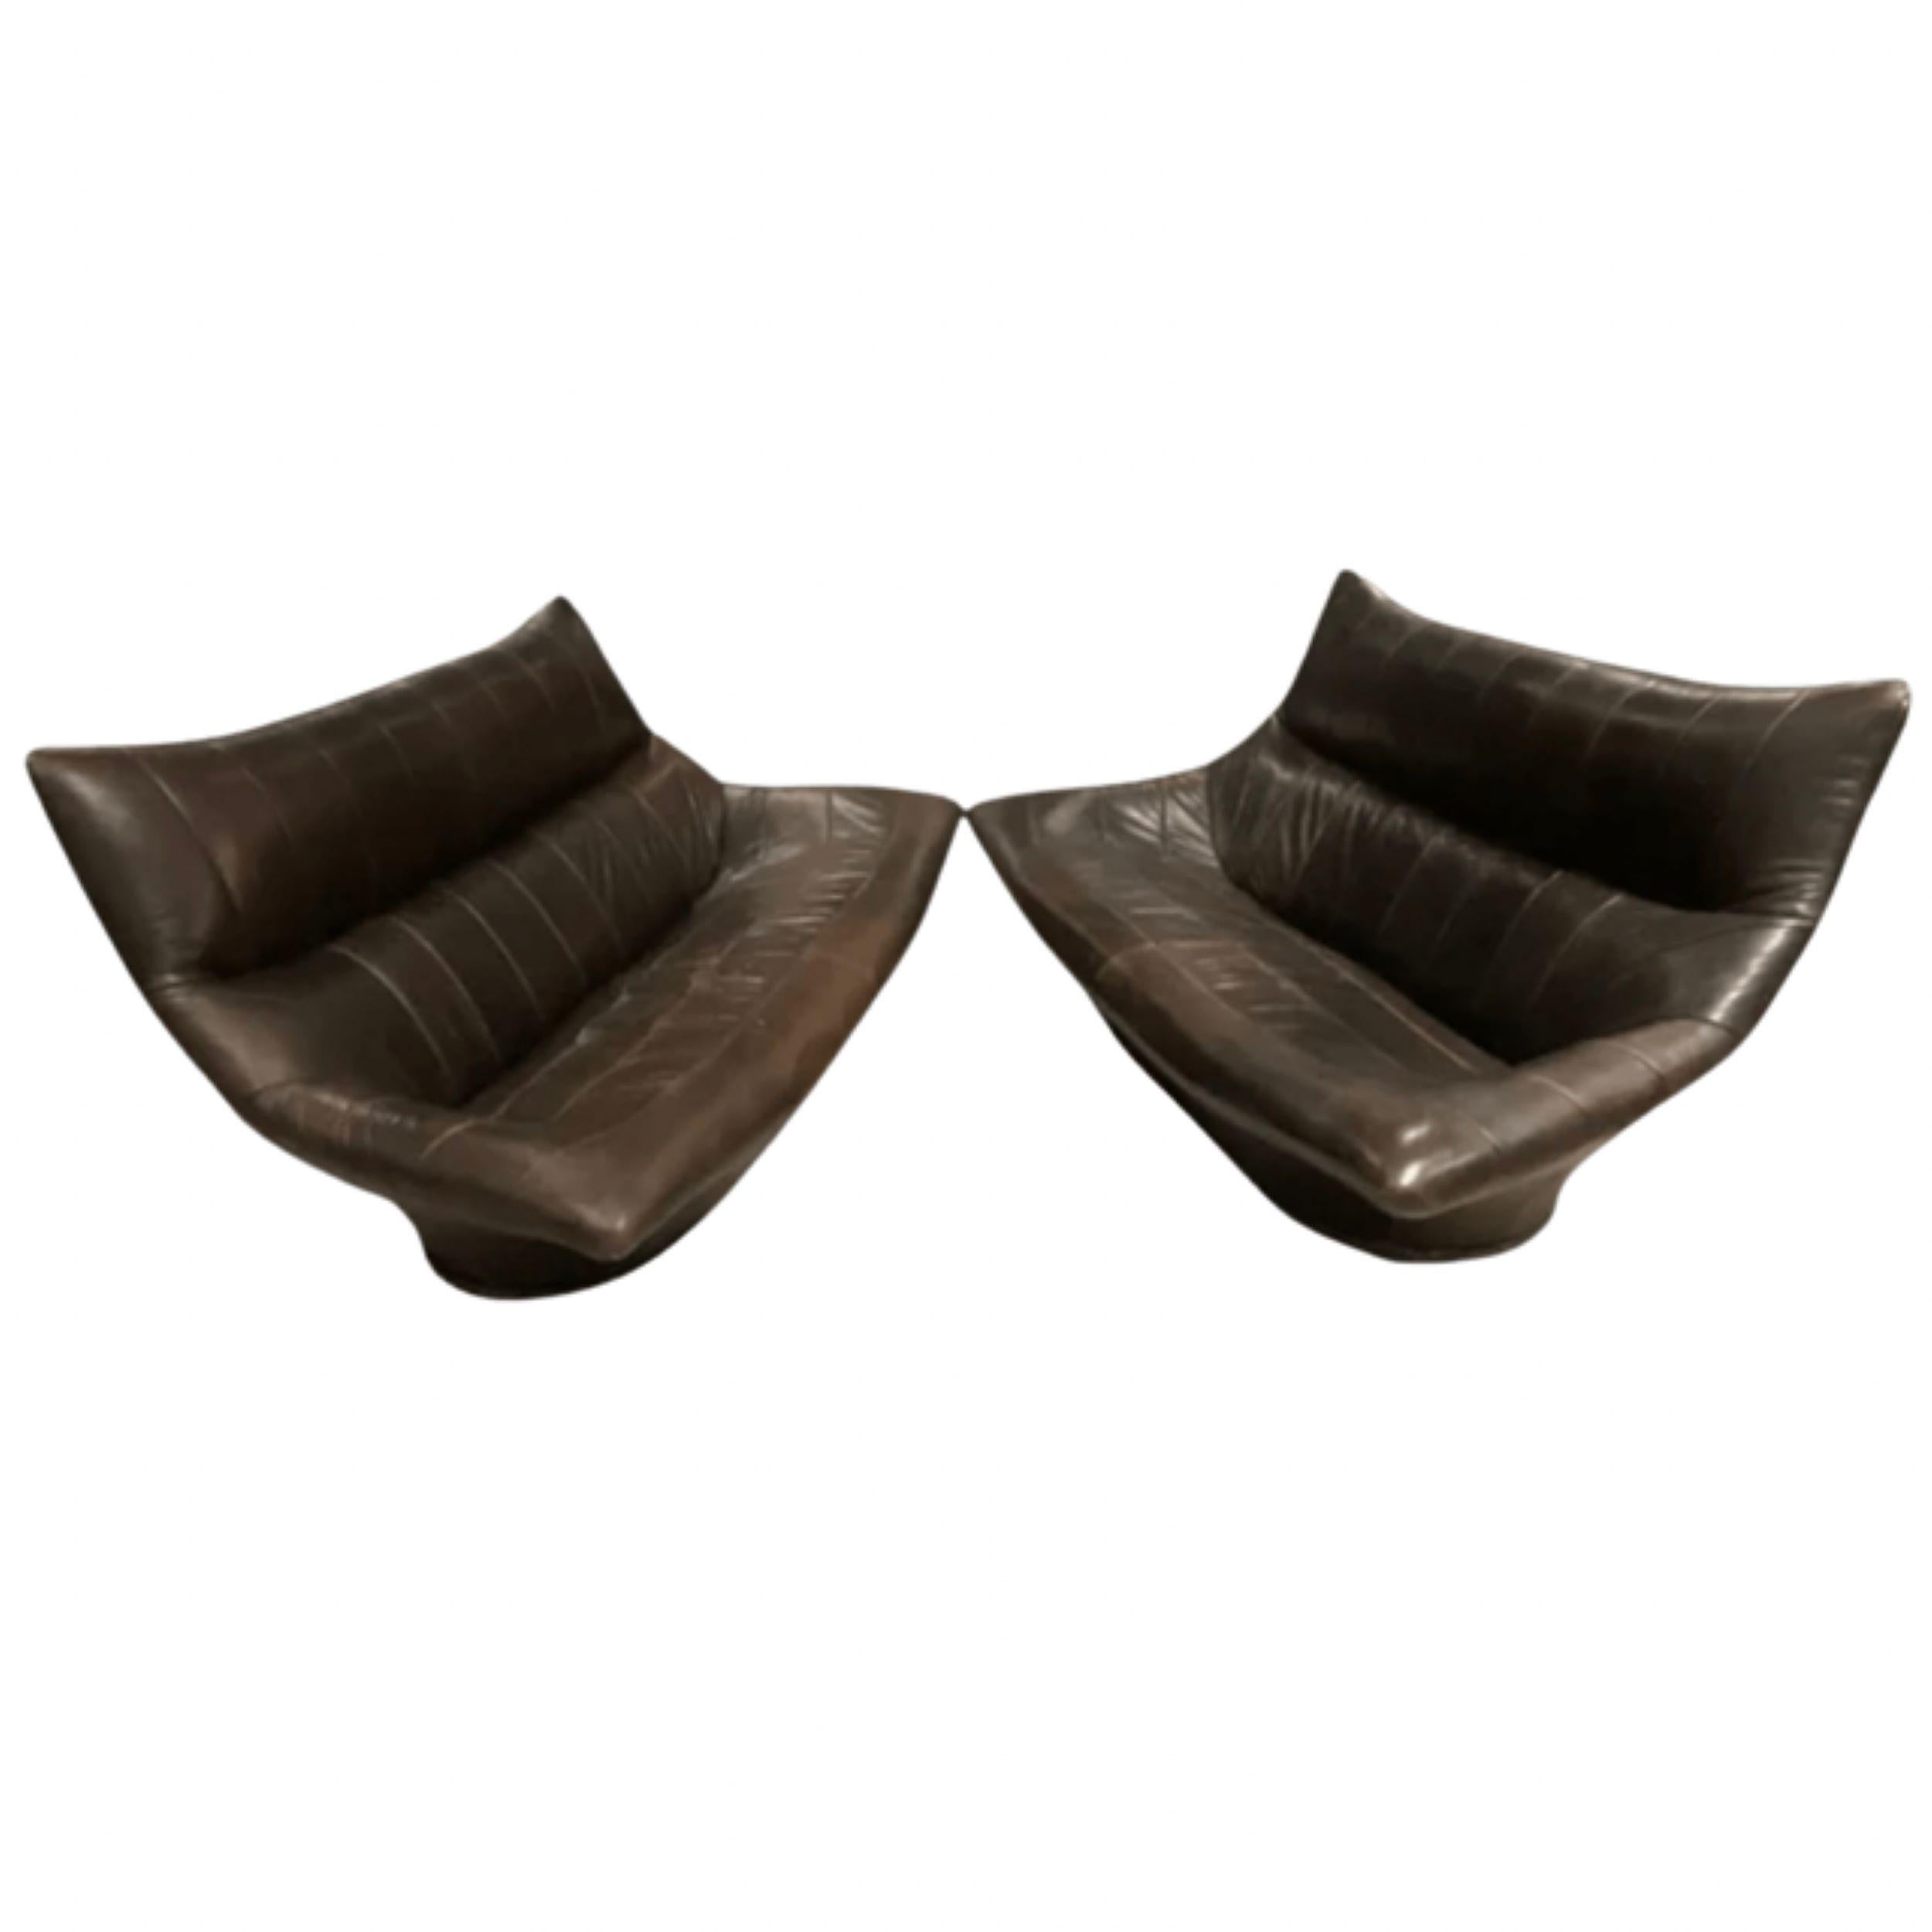 Gerard Van Den Berg
Netherlands
c. 1970
Pair of leather sofas
Original brown leather upholstery
Wear is consistent with Age & Use
Identical Pair

Van den Berg designed furniture for his father until founding Montis with his brother Ton in